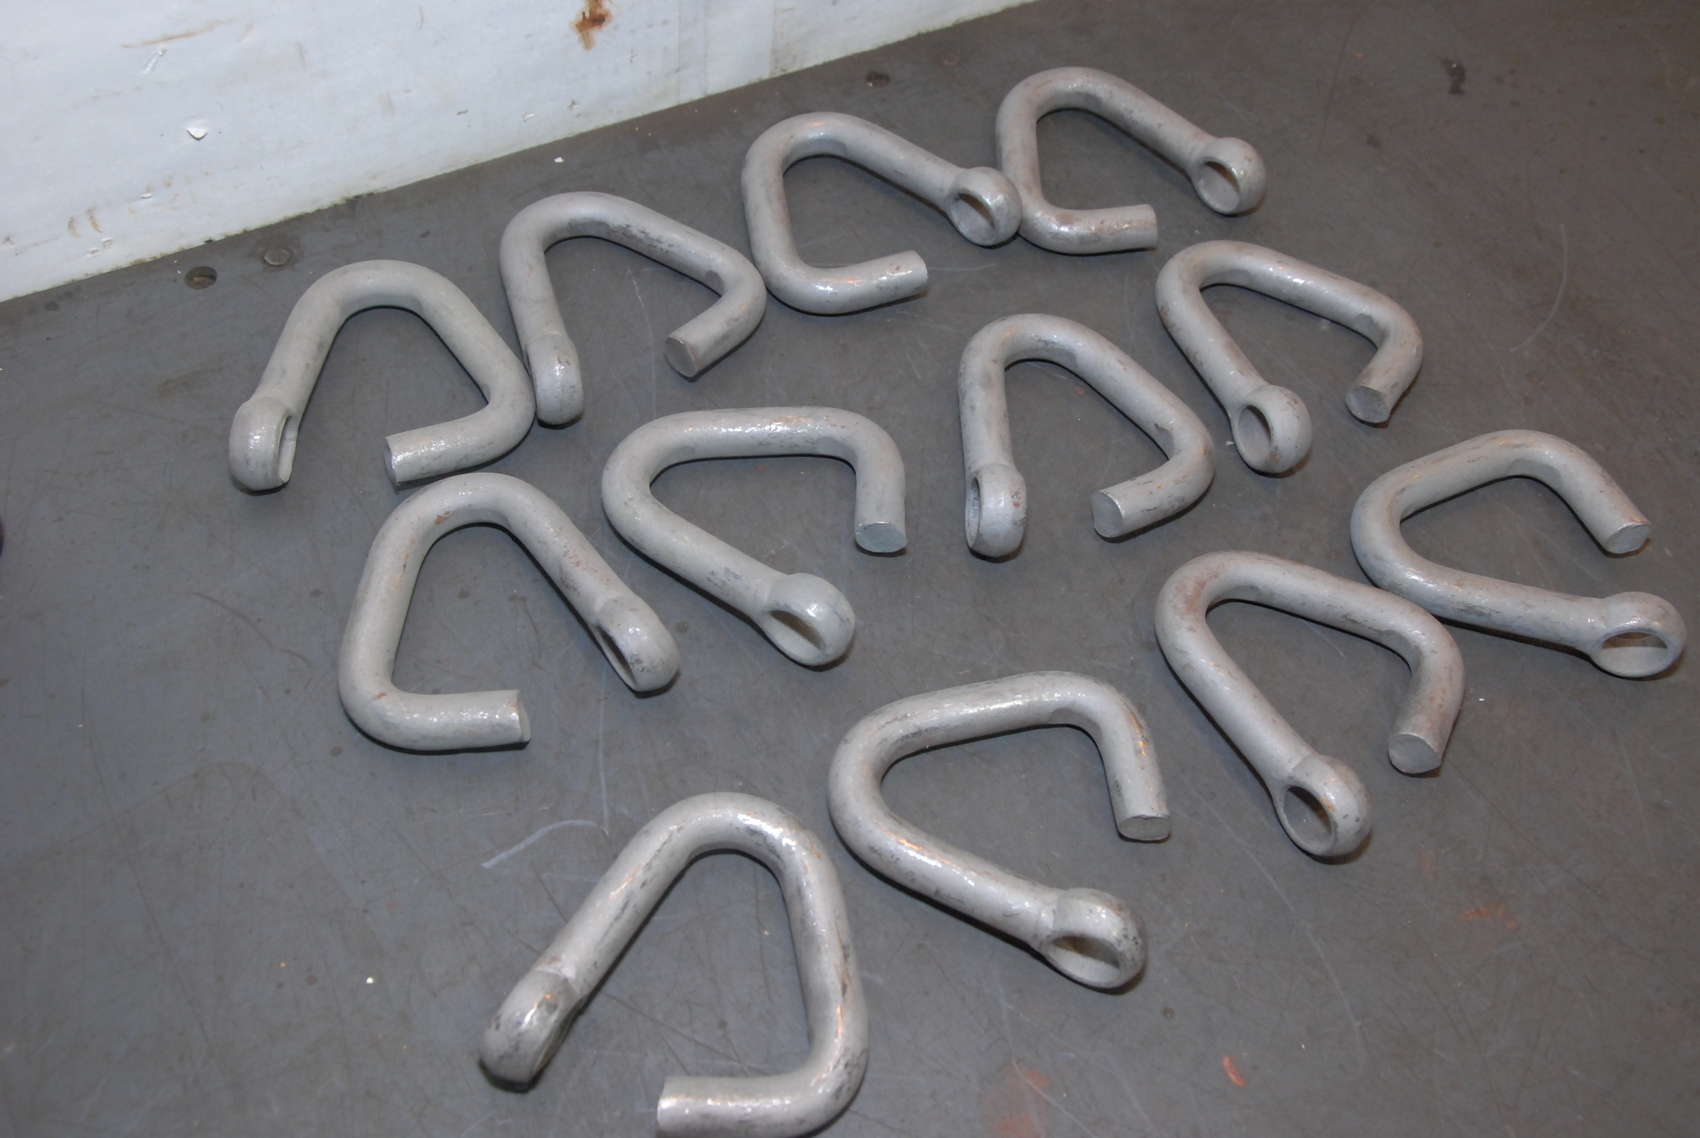 Lot of 12 Chain Link Repair 3/4 COLD SHUT